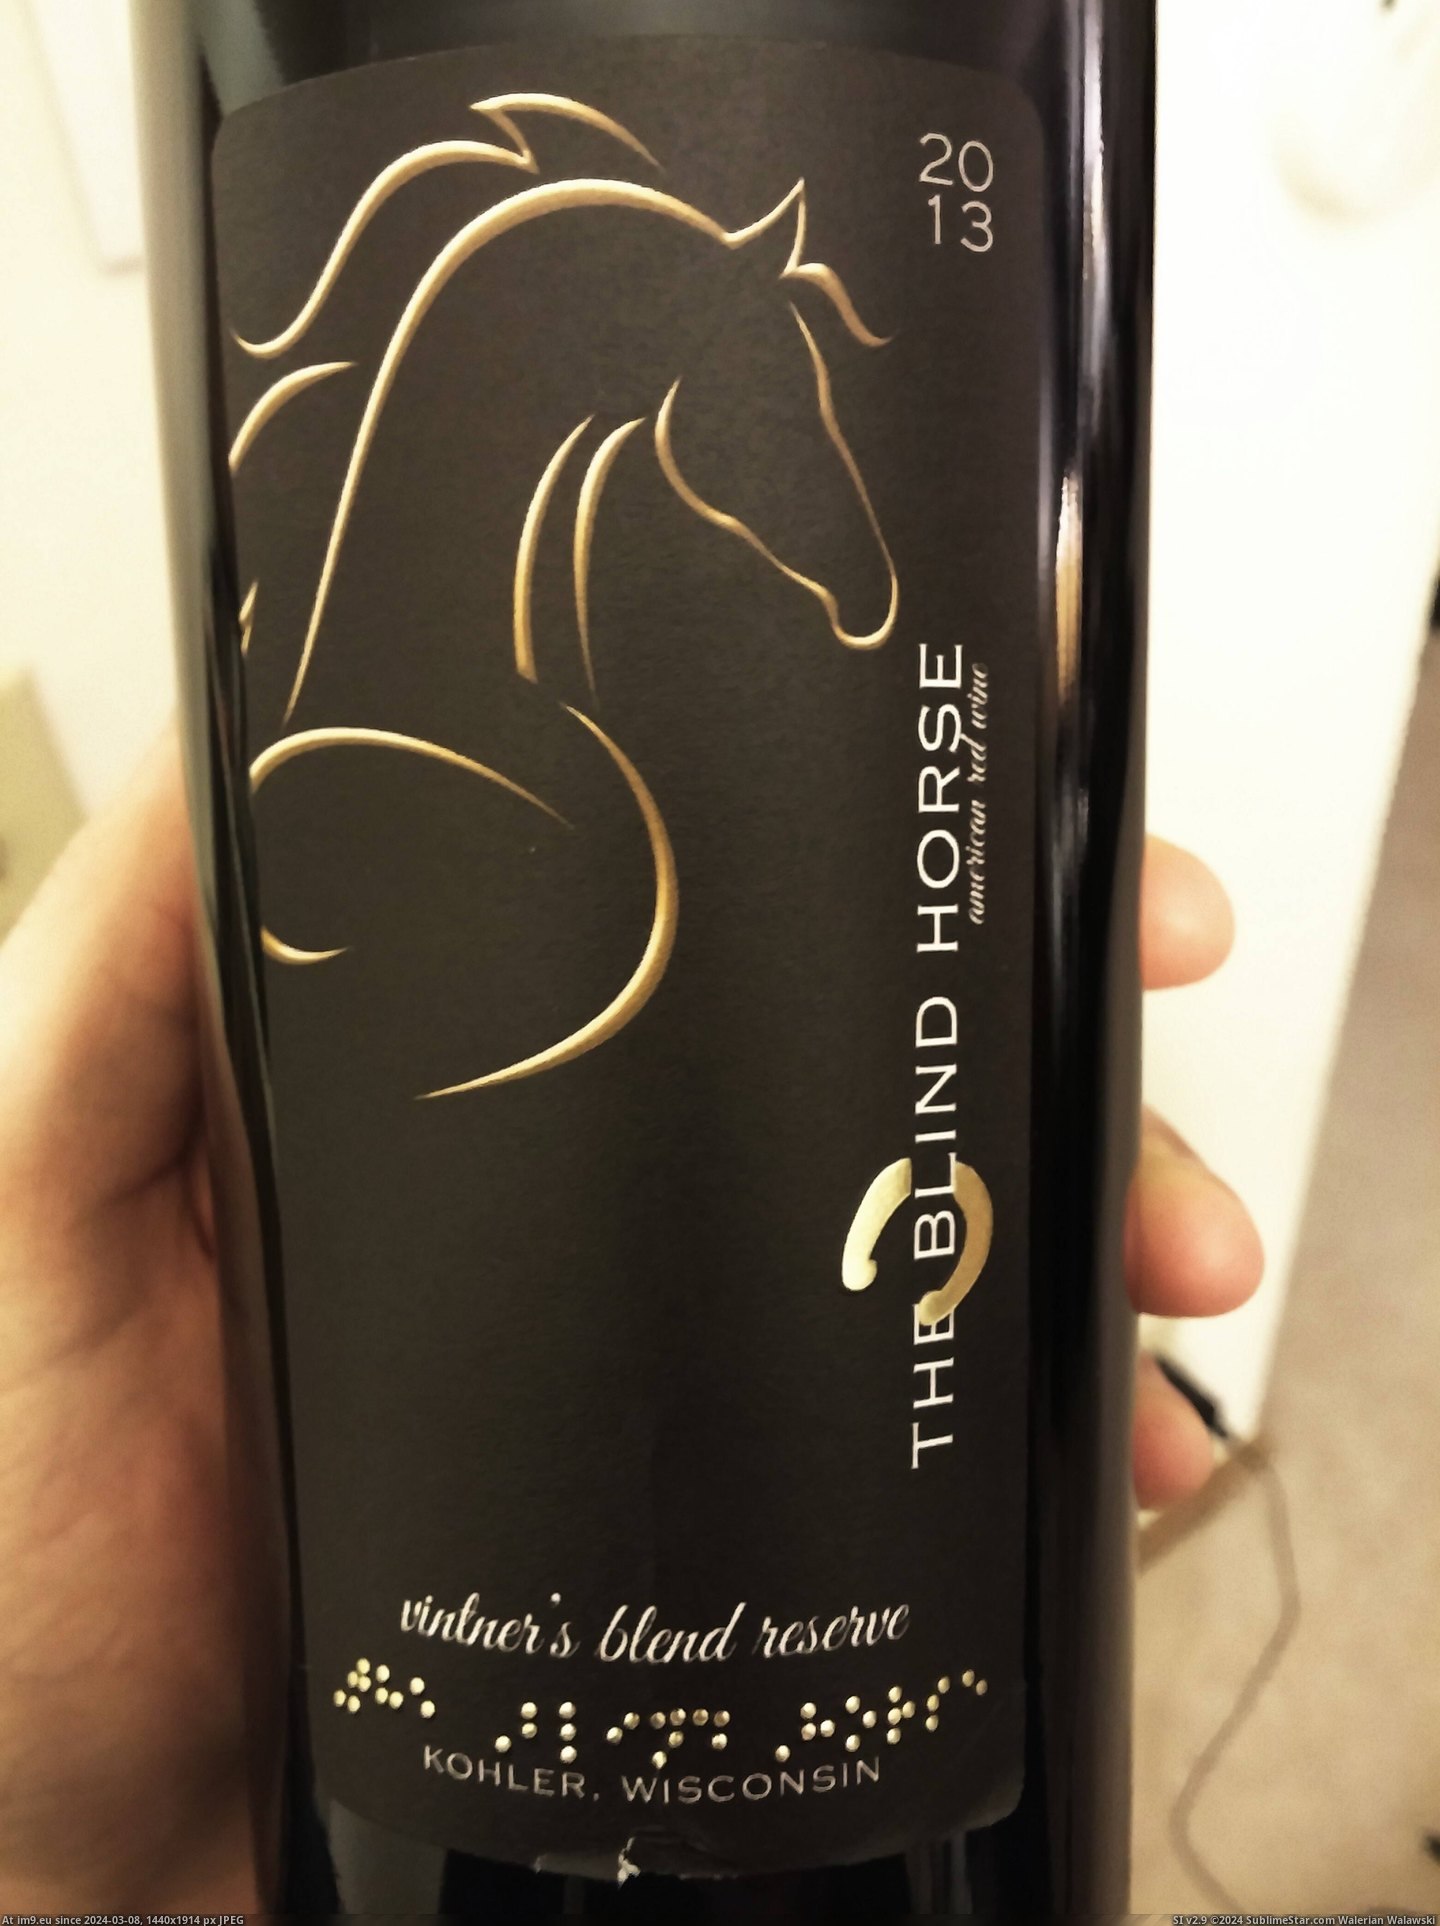 #Honor #Bottle #Horse #Actual #Label #Dots #Braille #Wine #Raised #Blind [Mildlyinteresting] This wine bottle label has actual raised Braille dots to honor the name of the winery, 'The Blind Horse.' Pic. (Image of album My r/MILDLYINTERESTING favs))